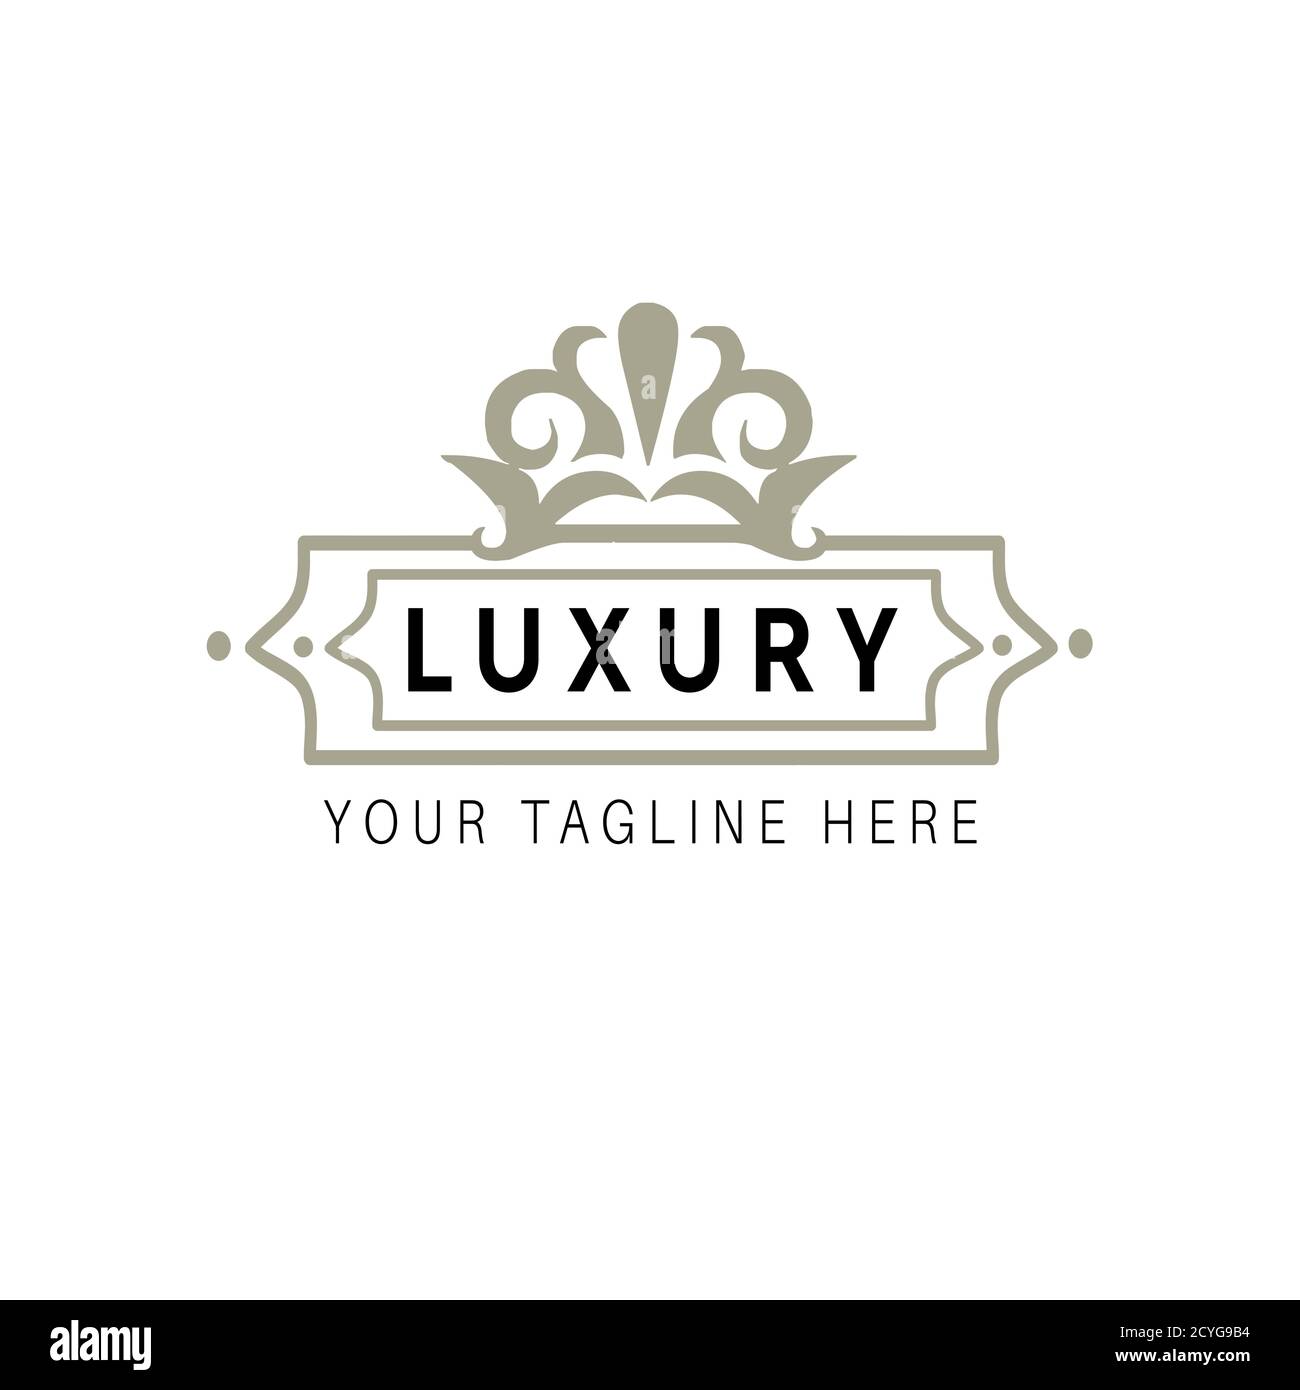 Royal brand illustration vector design for company and business royal hotel. Stock Vector